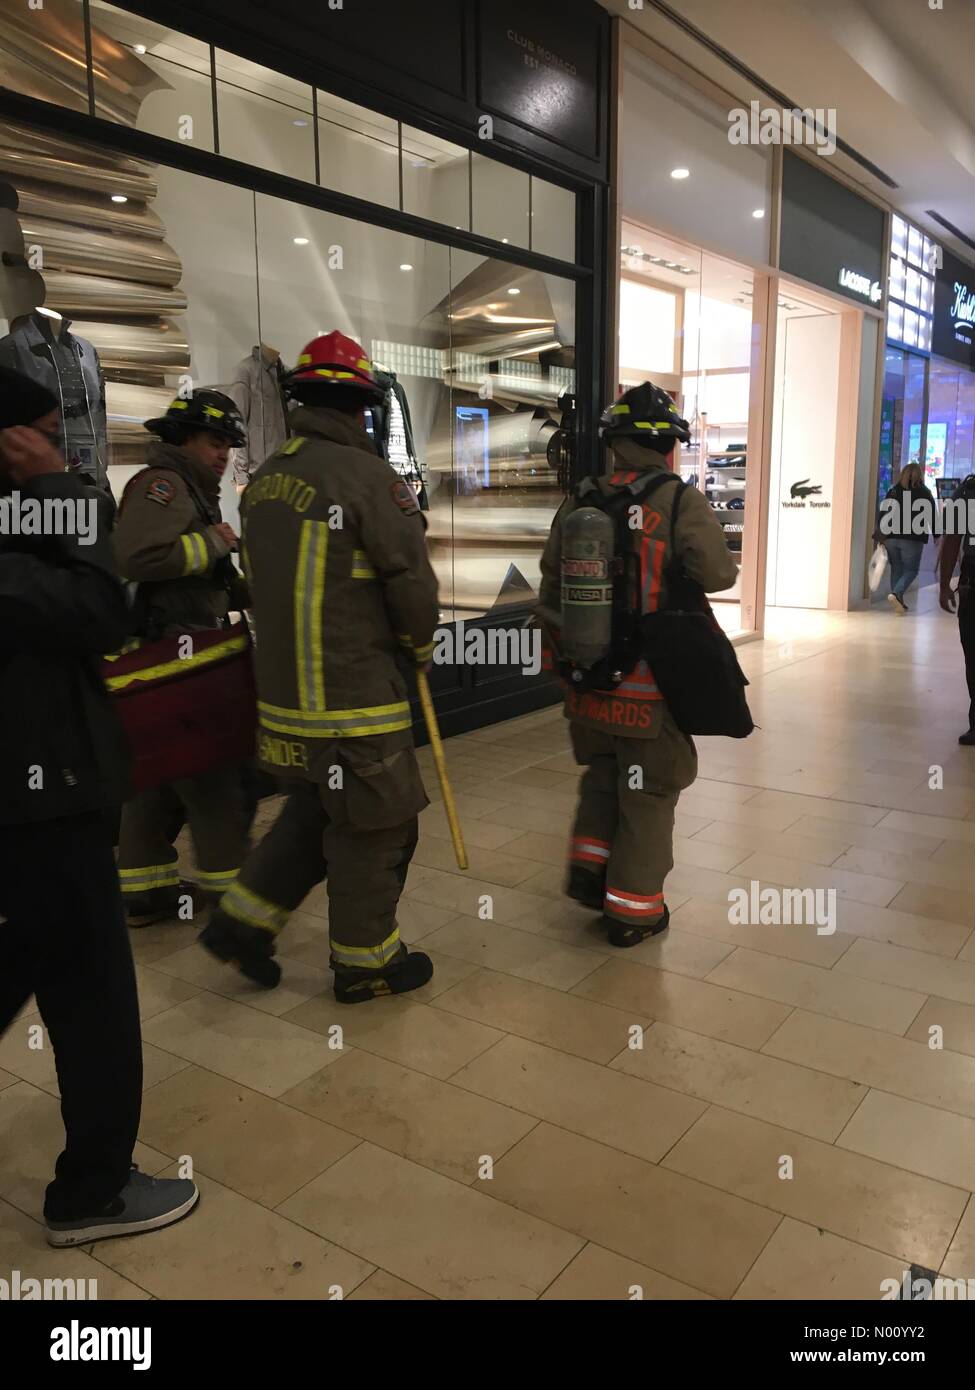 Toronto, Canada. 22nd Dec, 2018. Fire officers deployed inside Yorkdale mall following a suspected fire alarm in Toronto today, a few days to Xmas. Credit: Ayodele Ojo/StockimoNews/Alamy Live News Stock Photo